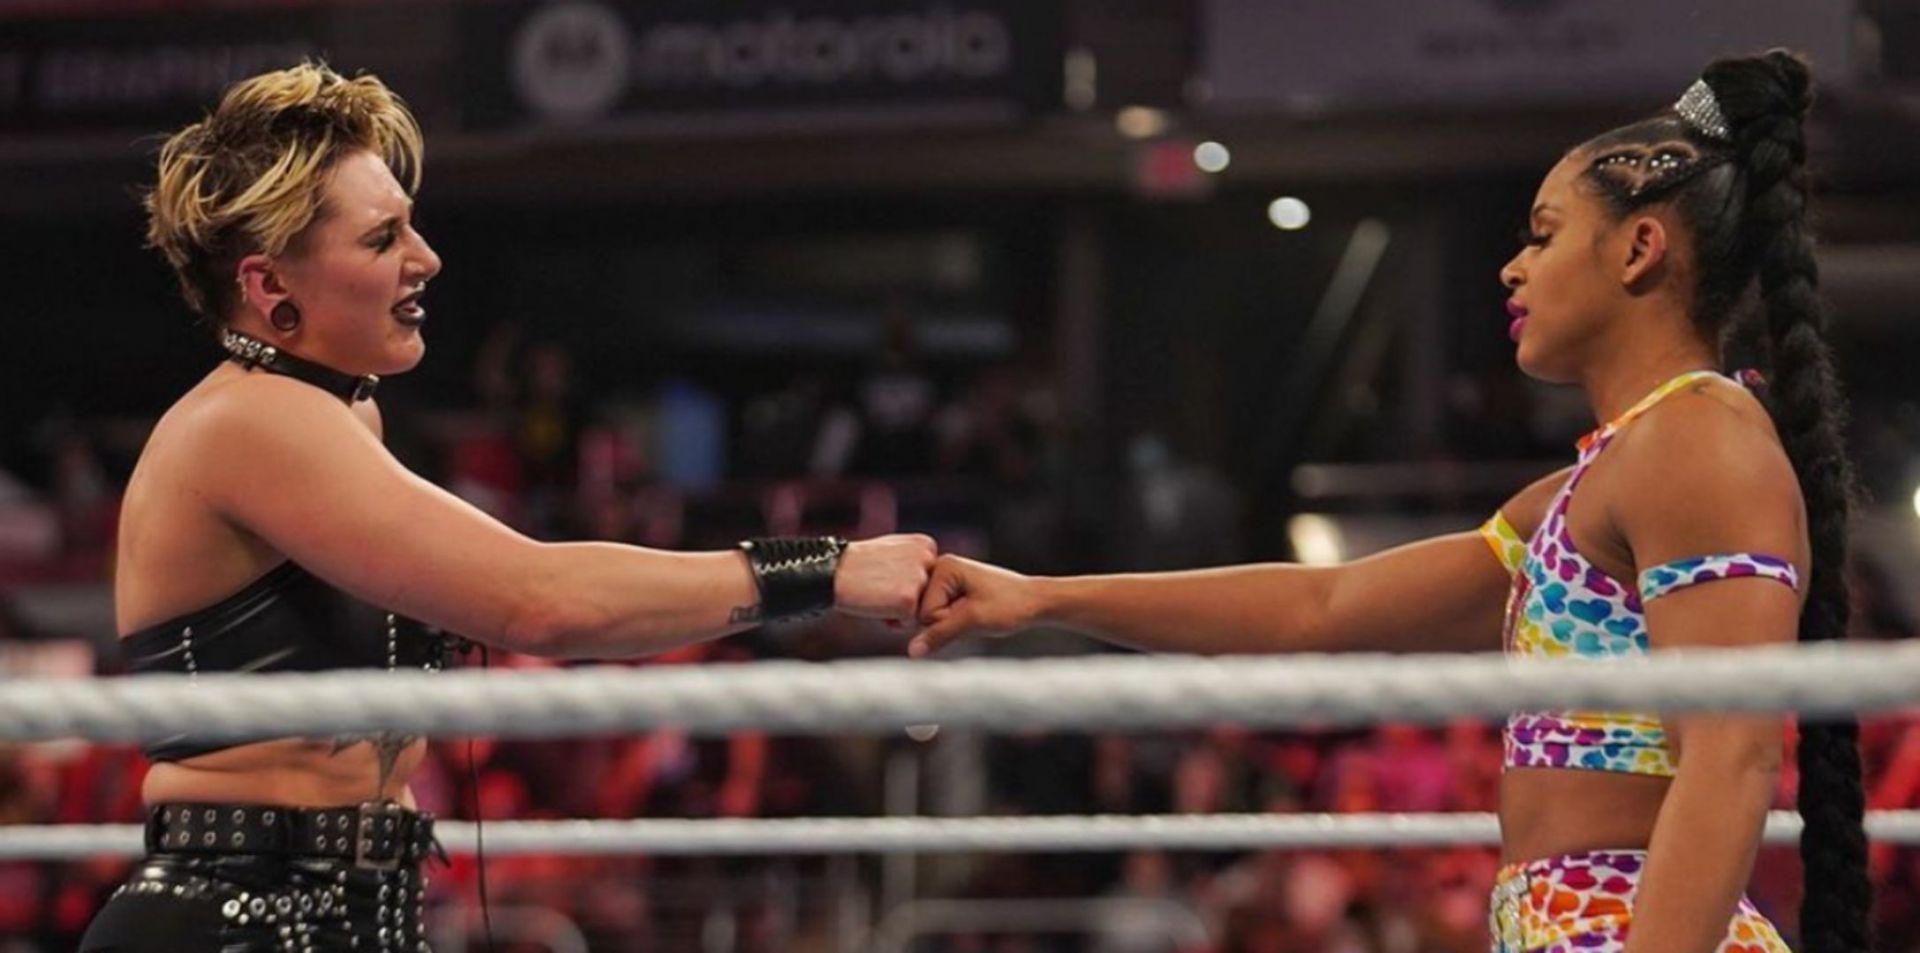 After RAW, Jerry Lawler praised Belair and Ripley.